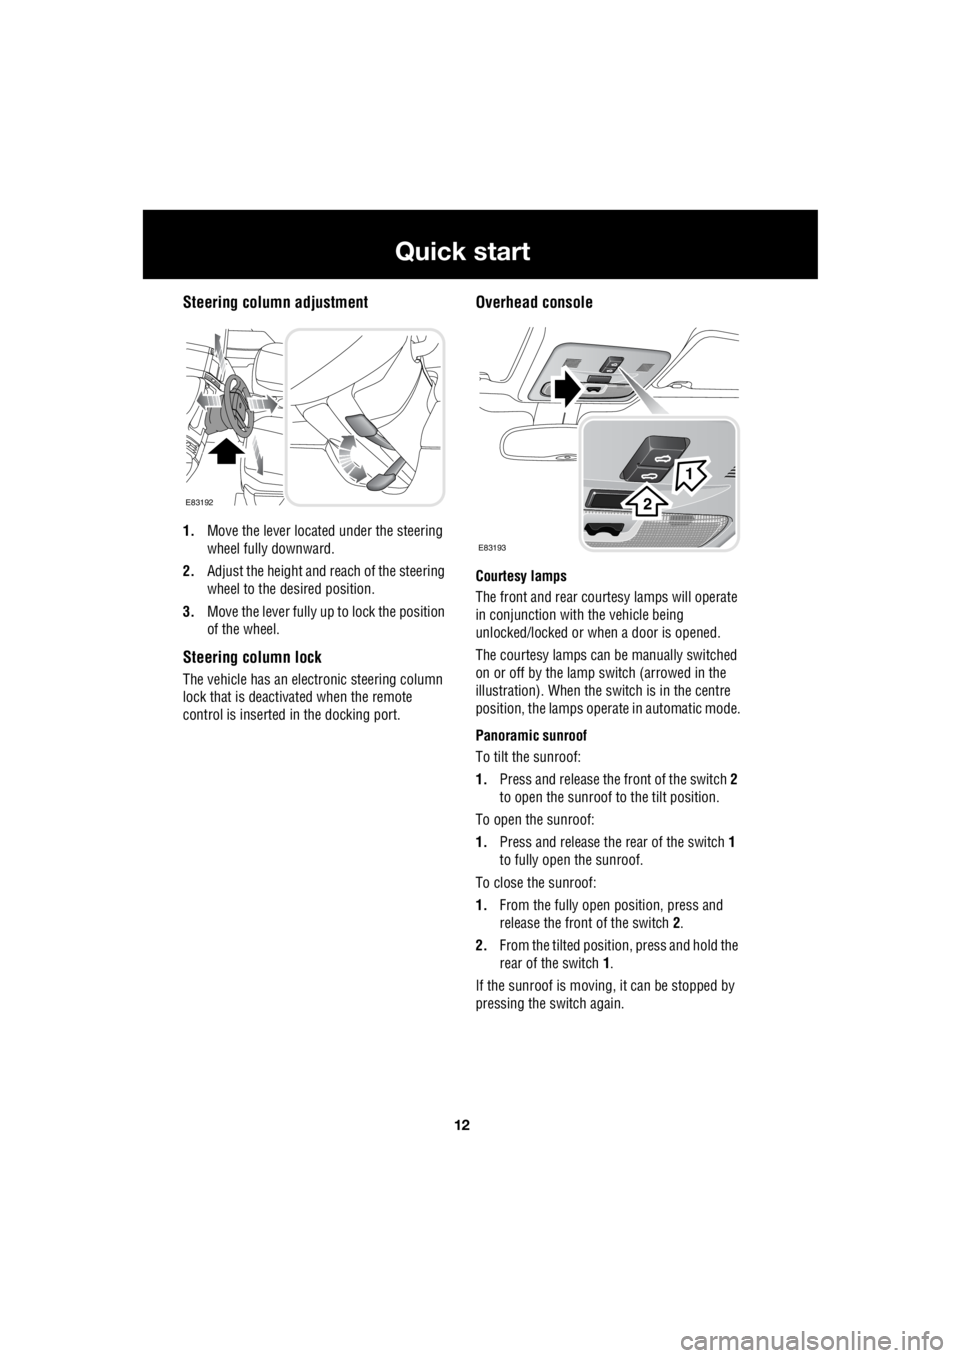 LAND ROVER FRELANDER 2 2006  Repair Manual 12
Quick start
L
Steering column adjustment
1. Move the lever located under the steering  
wheel fully downward. 
2.  Adjust the height and  reach of the steering  
wheel to the desired position. 
3. 